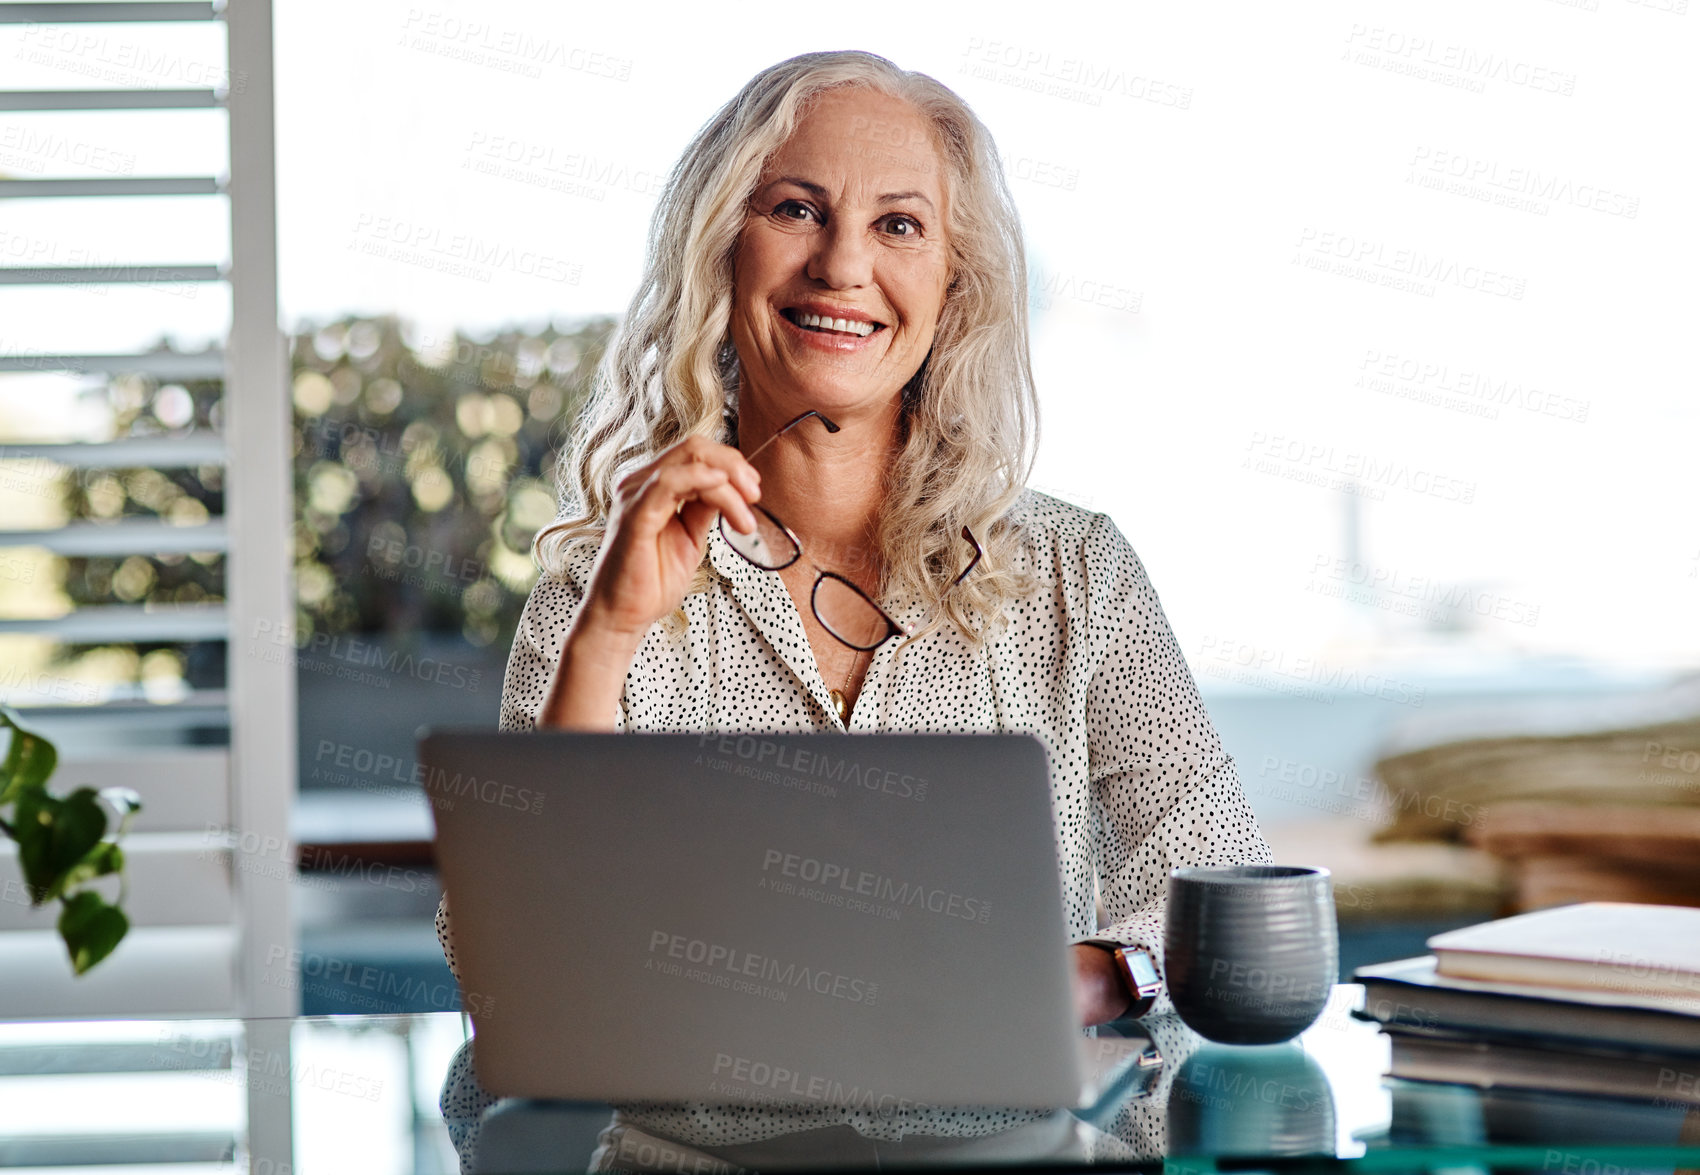 Buy stock photo Cropped portrait of an attractive senior businesswoman smiling while working from home